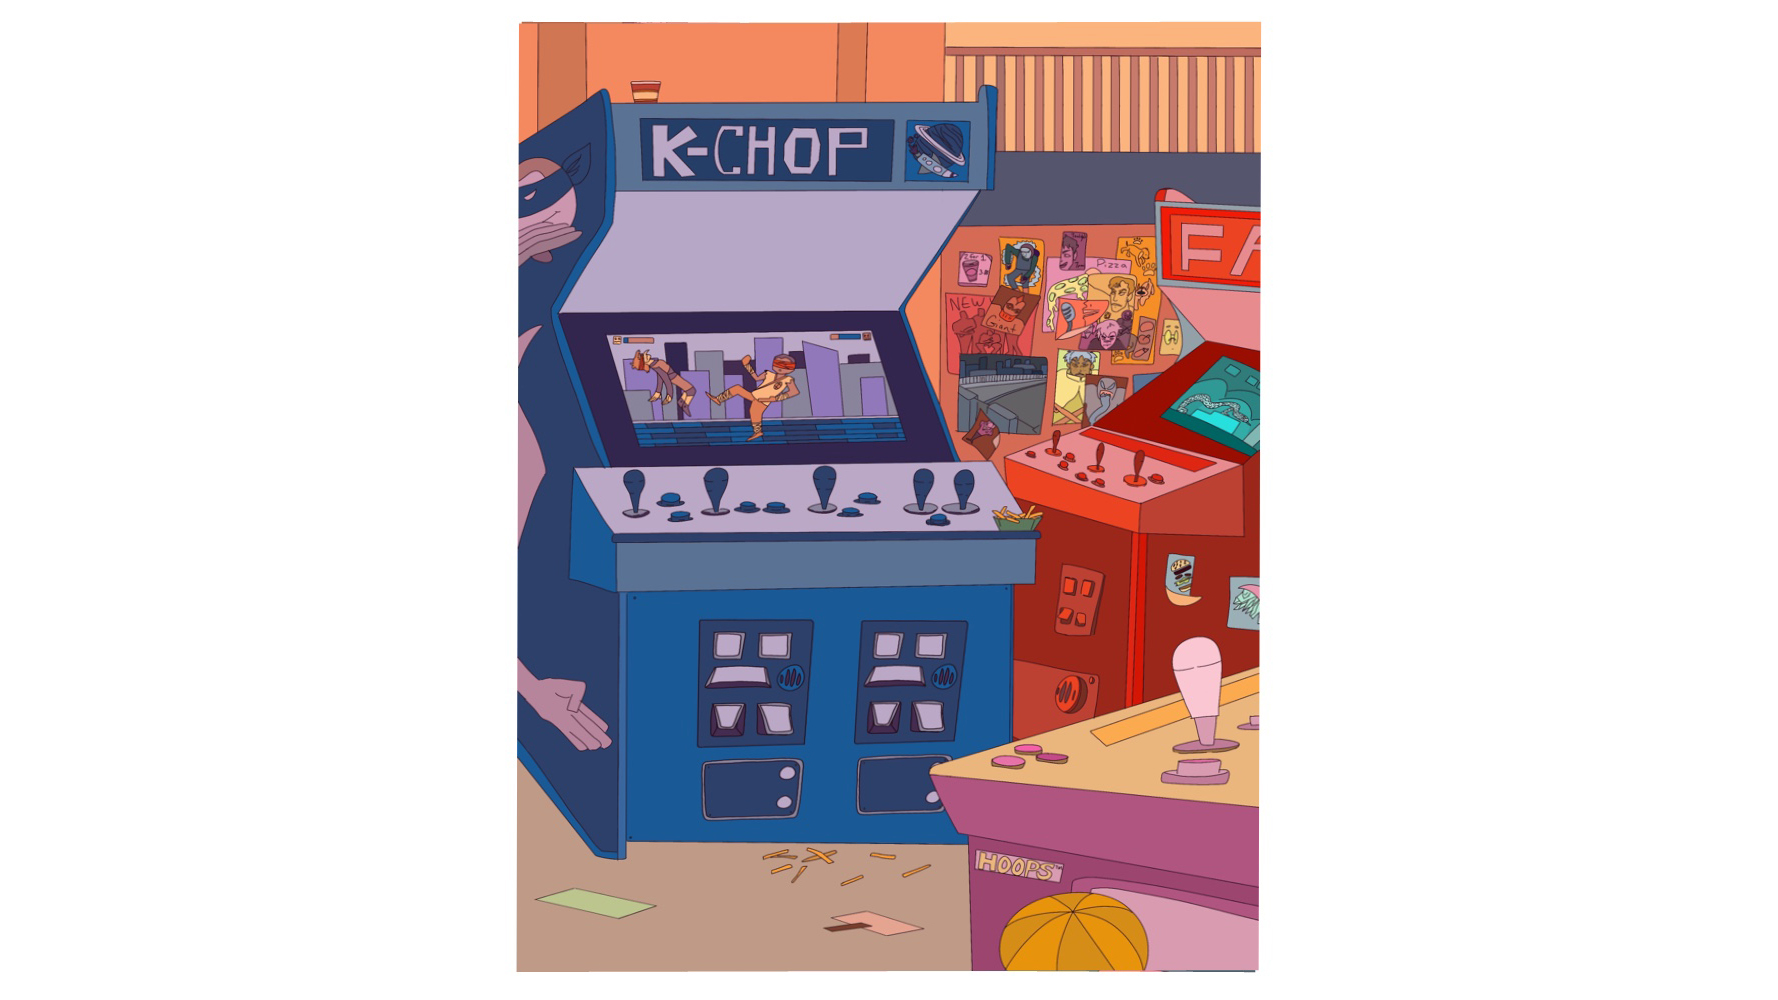 An illustration of arcade games